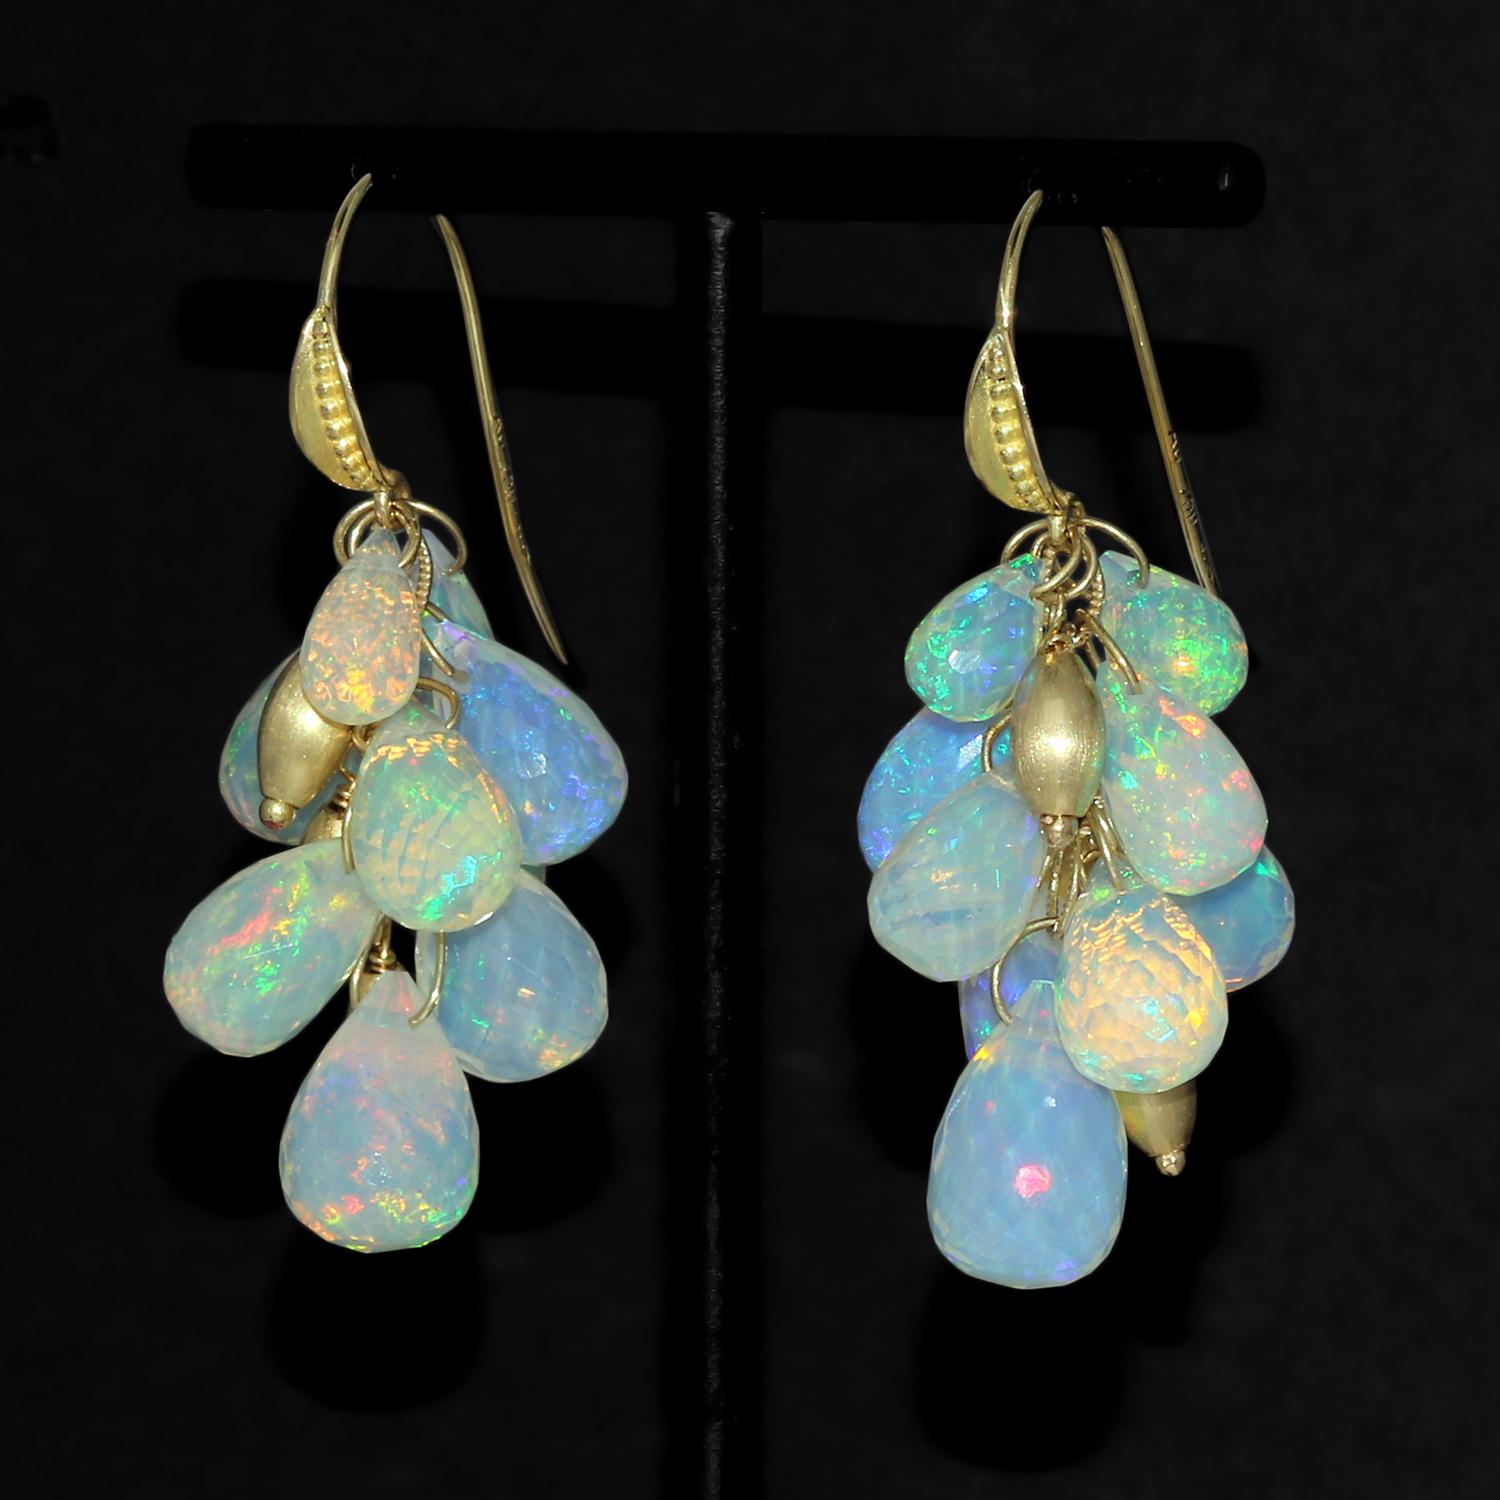 One of a Kind Cluster Drop Earrings hand-fabricated by acclaimed, award-winning jewelry maker Barbara Heinrich in signature-finished 18k yellow gold featuring 25.59 total carats of perfectly-matched, top quality faceted Ethiopian opal briolettes,